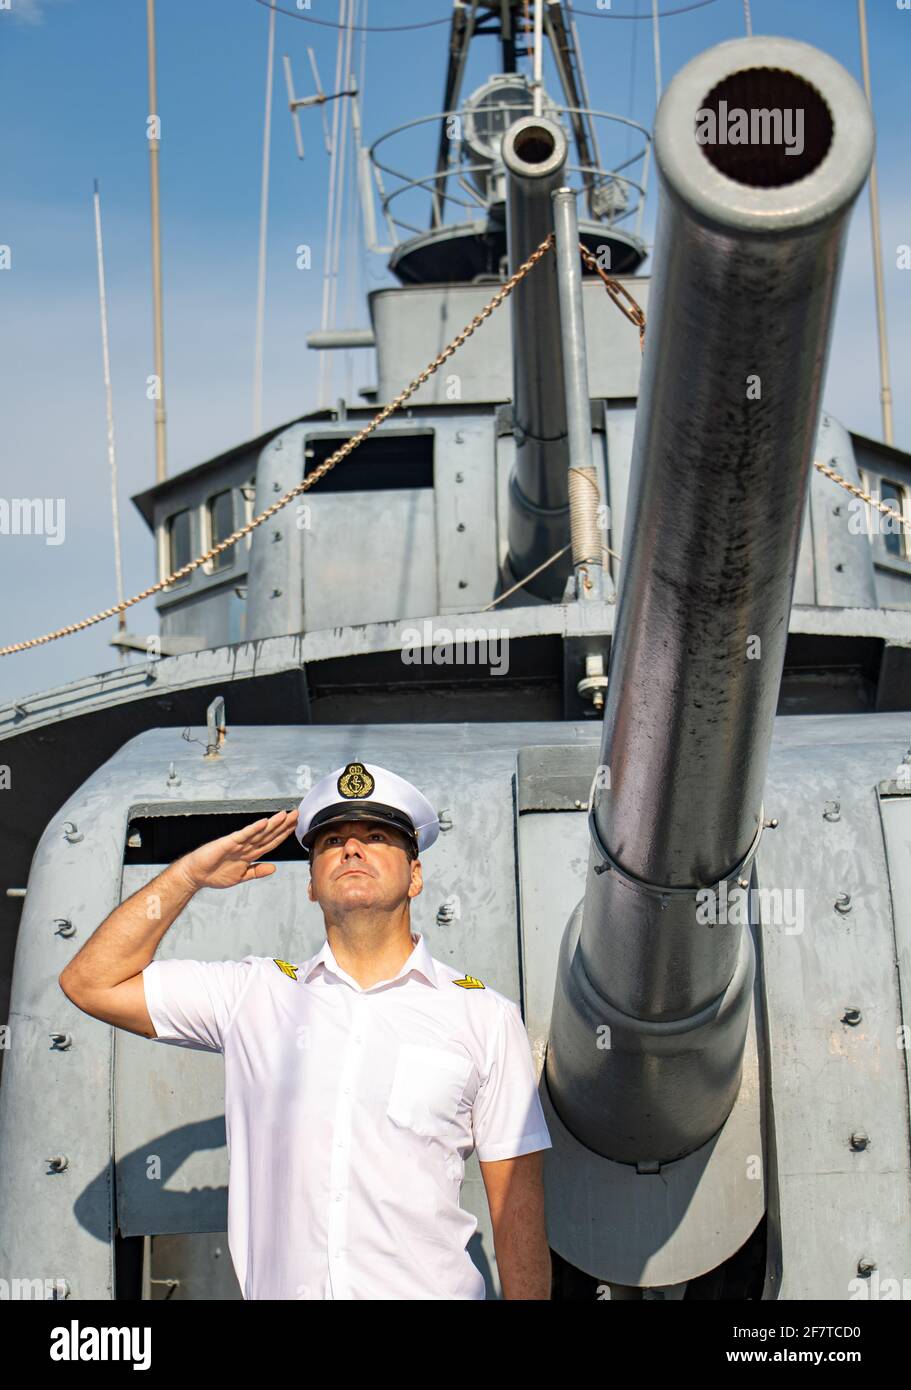 A navy officer standing under a ship's cannon and do salute.The captain in white uniform stands aboard a ship and saluting. Stock Photo